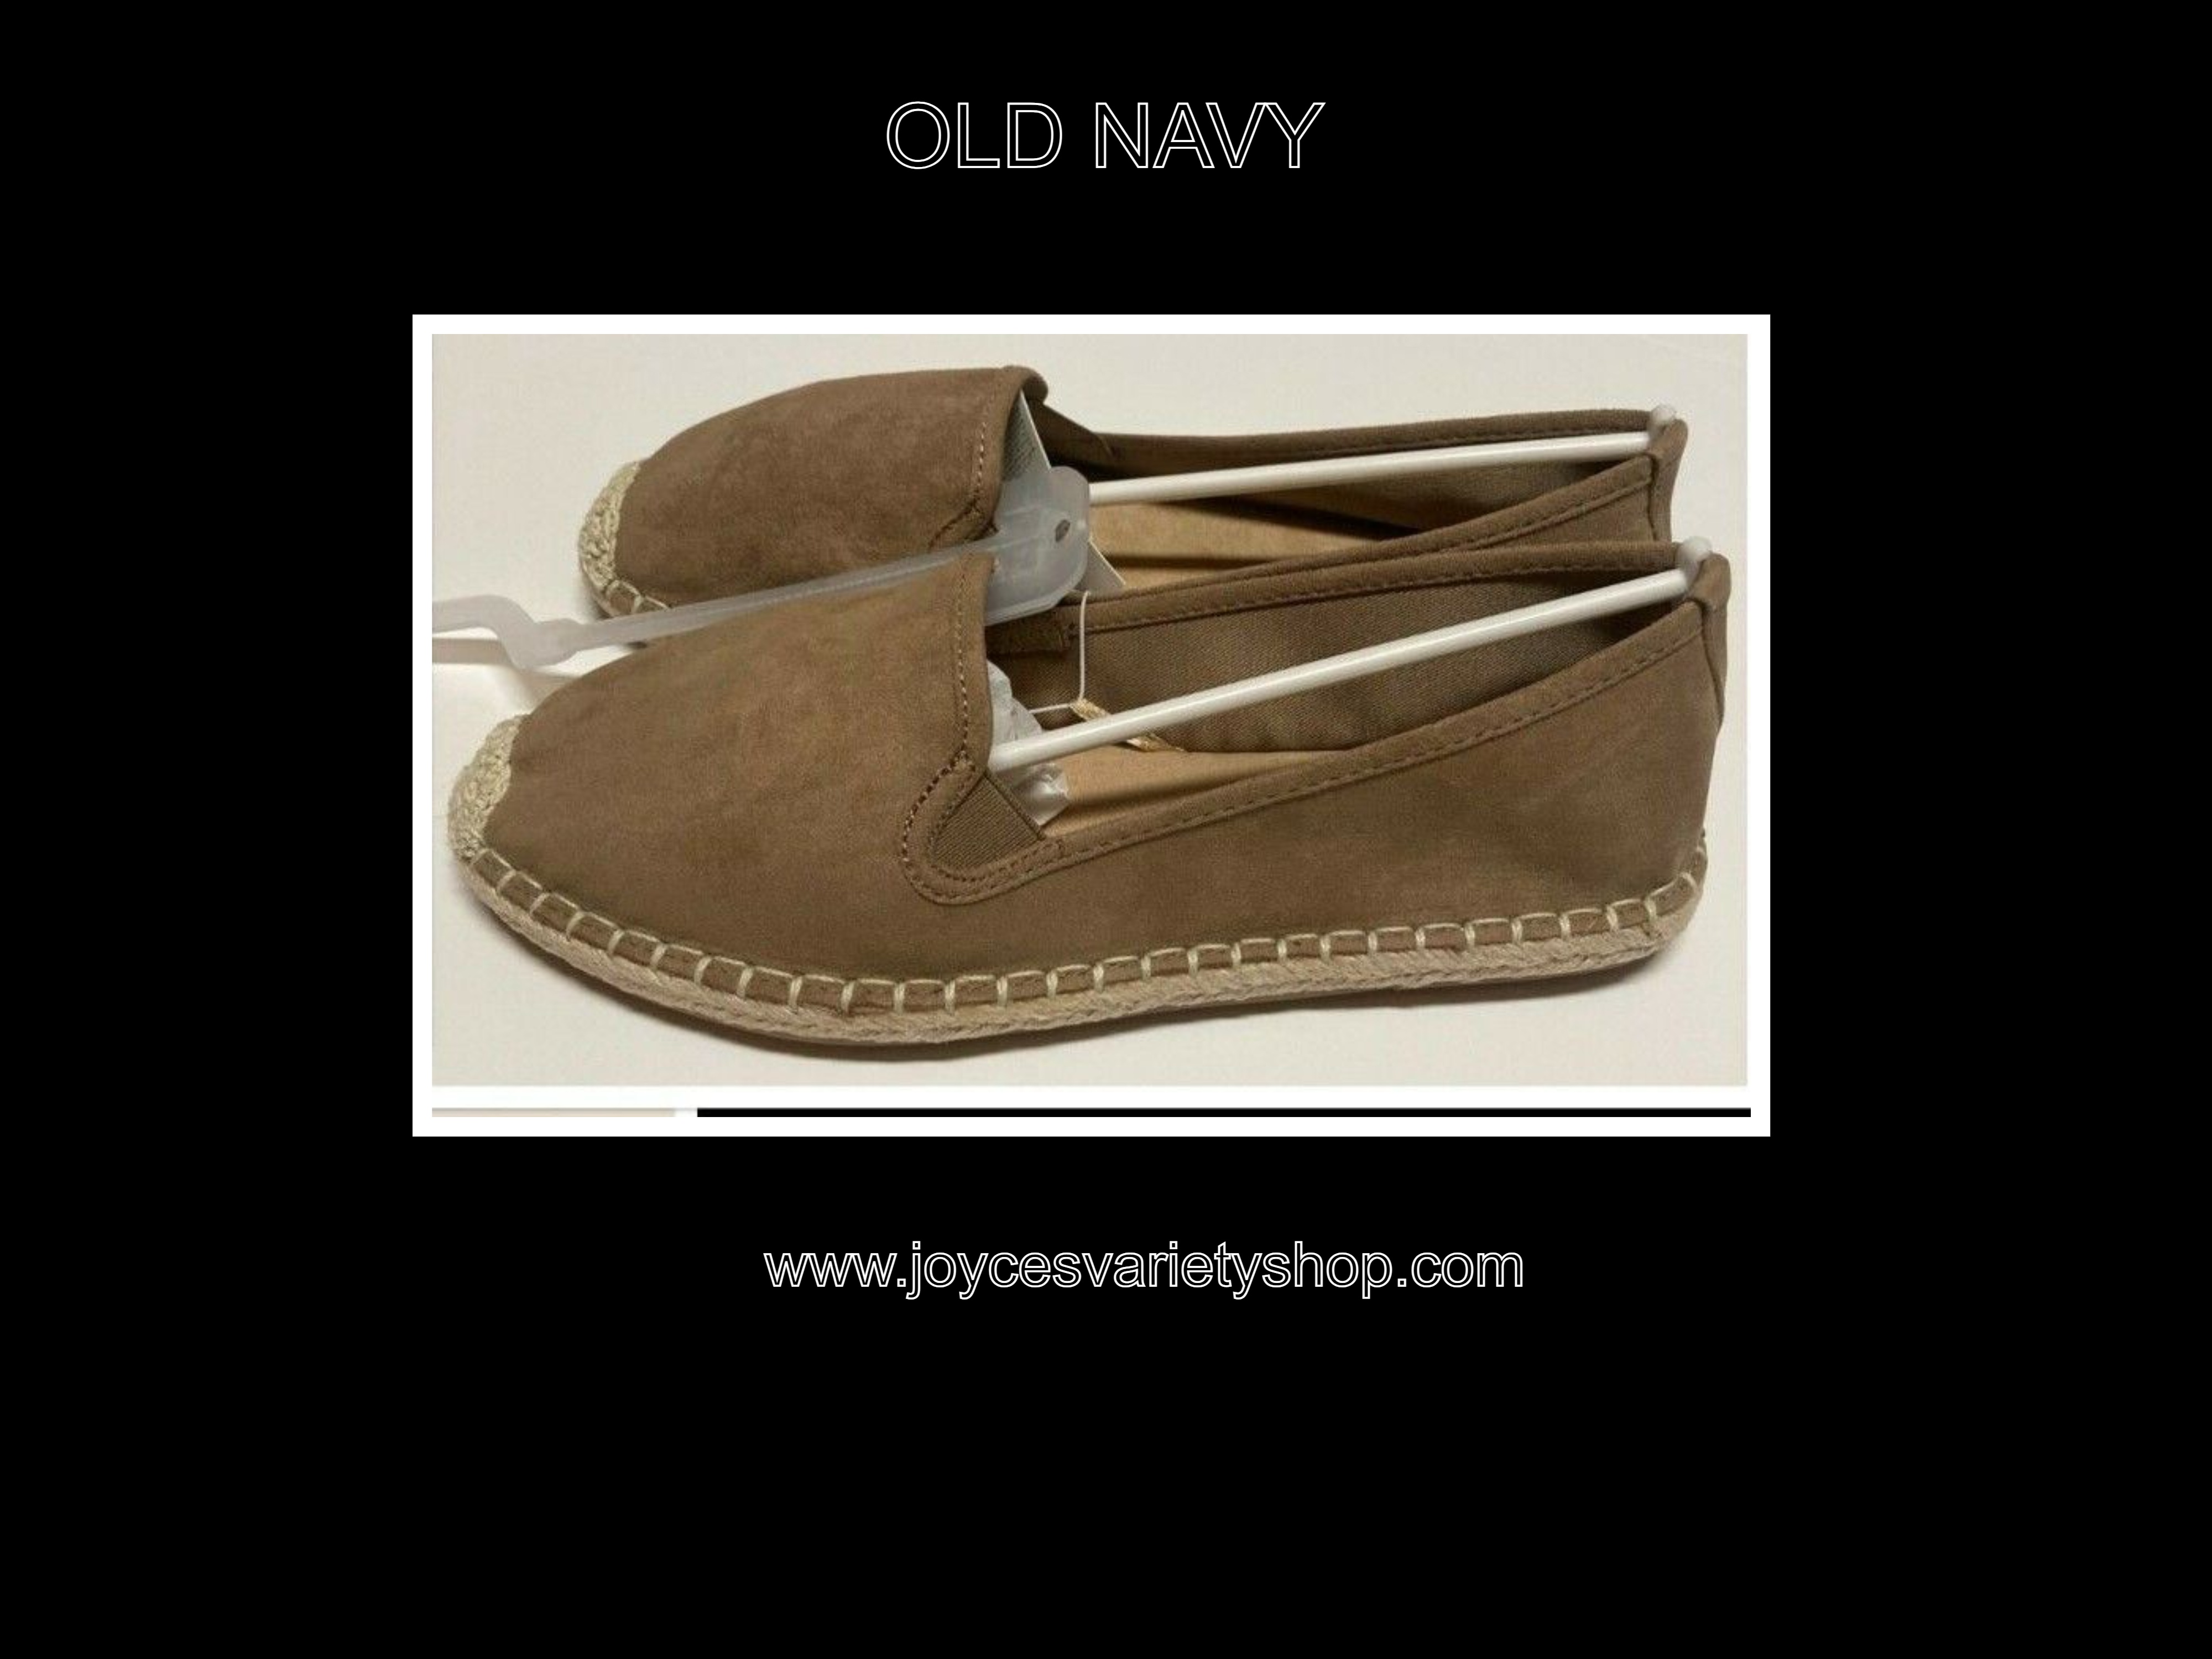 Old Navy Shoes Beige Faux Suede Slip On Closed Toe Many Sizes Standard Width